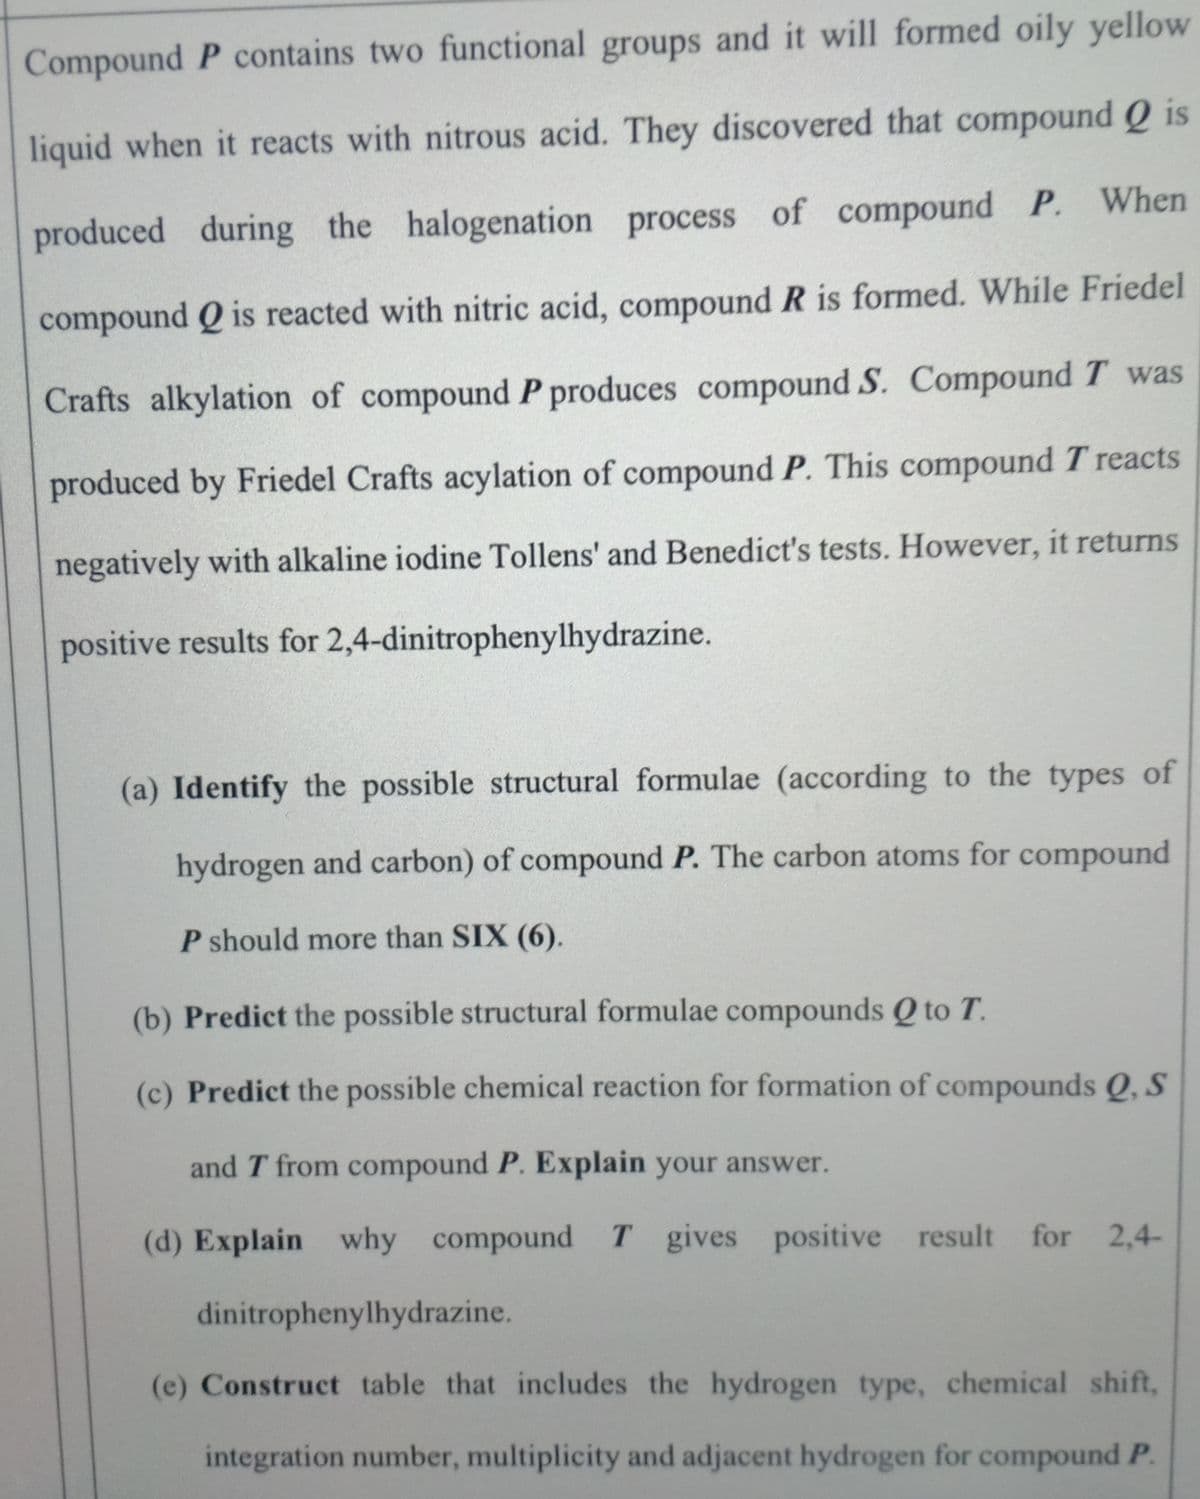 Compound P contains two functional groups and it will formed oily yellow
liquid when it reacts with nitrous acid. They discovered that compound Q is
produced during the halogenation process of compound P. When
compound Q is reacted with nitric acid, compound R is formed. While Friedel
Crafts alkylation of compound P produces compound S. Compound T was
produced by Friedel Crafts acylation of compound P. This compound T reacts
negatively with alkaline iodine Tollens' and Benedict's tests. However, it returns
positive results for 2,4-dinitrophenylhydrazine.
(a) Identify the possible structural formulae (according to the types of
hydrogen and carbon) of compound P. The carbon atoms for compound
P should more than SIX (6).
(b) Predict the possible structural formulae compounds Q to T.
(c) Predict the possible chemical reaction for formation of compounds Q, S
and T from compound P. Explain your answer.
(d) Explain why compound T gives positive result for 2,4-
dinitrophenylhydrazine.
(e) Construct table that includes the hydrogen type, chemical shift,
integration number, multiplicity and adjacent hydrogen for compound P.
